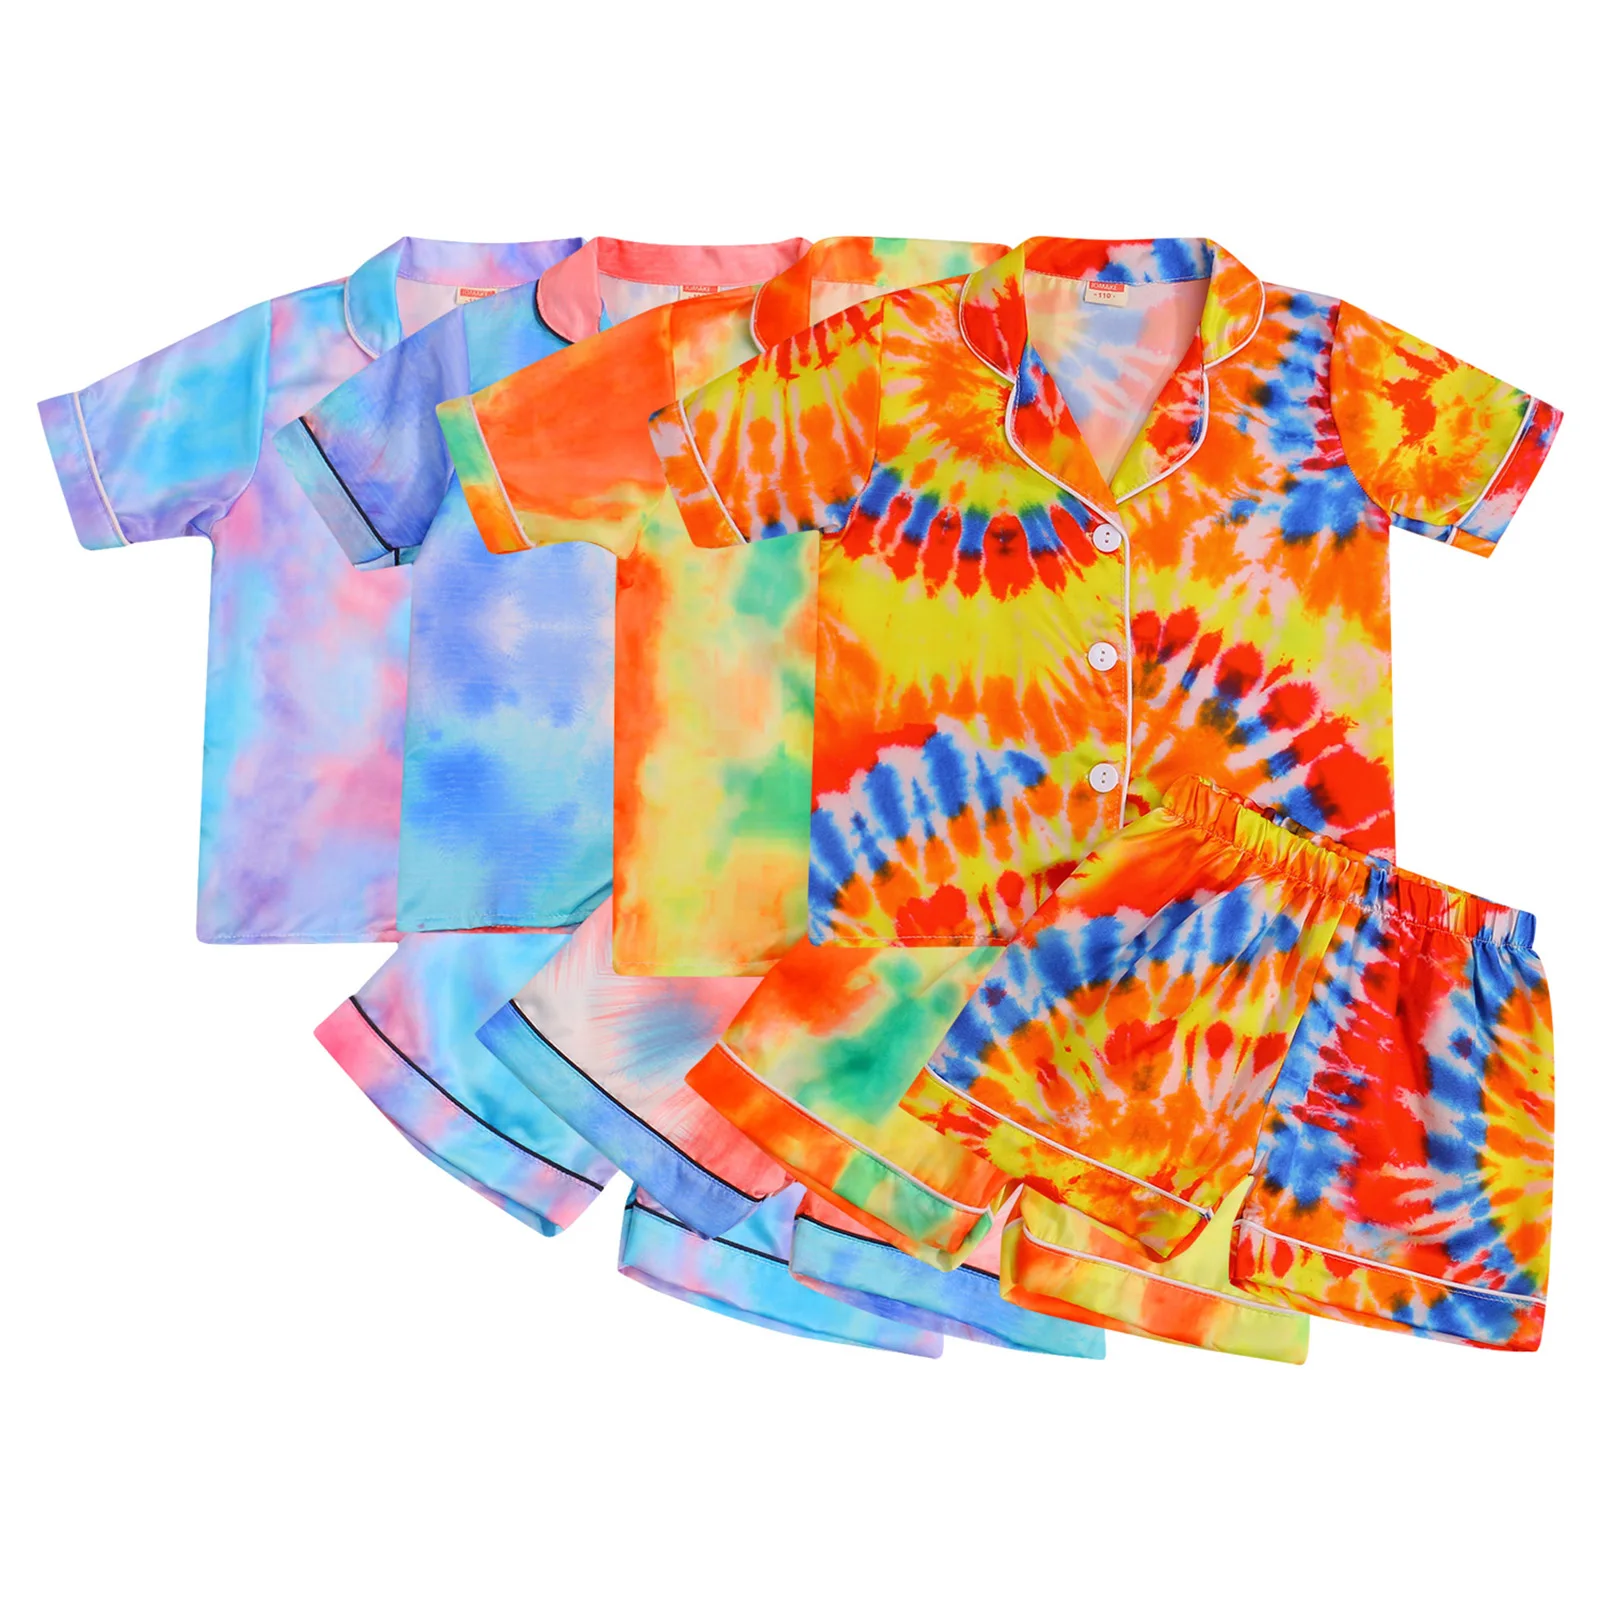 

Summer Childrens Pajamas Set Tie-dye Short Sleeve T-shirt and Shorts 2Pcs Outfits Casual Sleepwear for Boys Girls Home Clothes